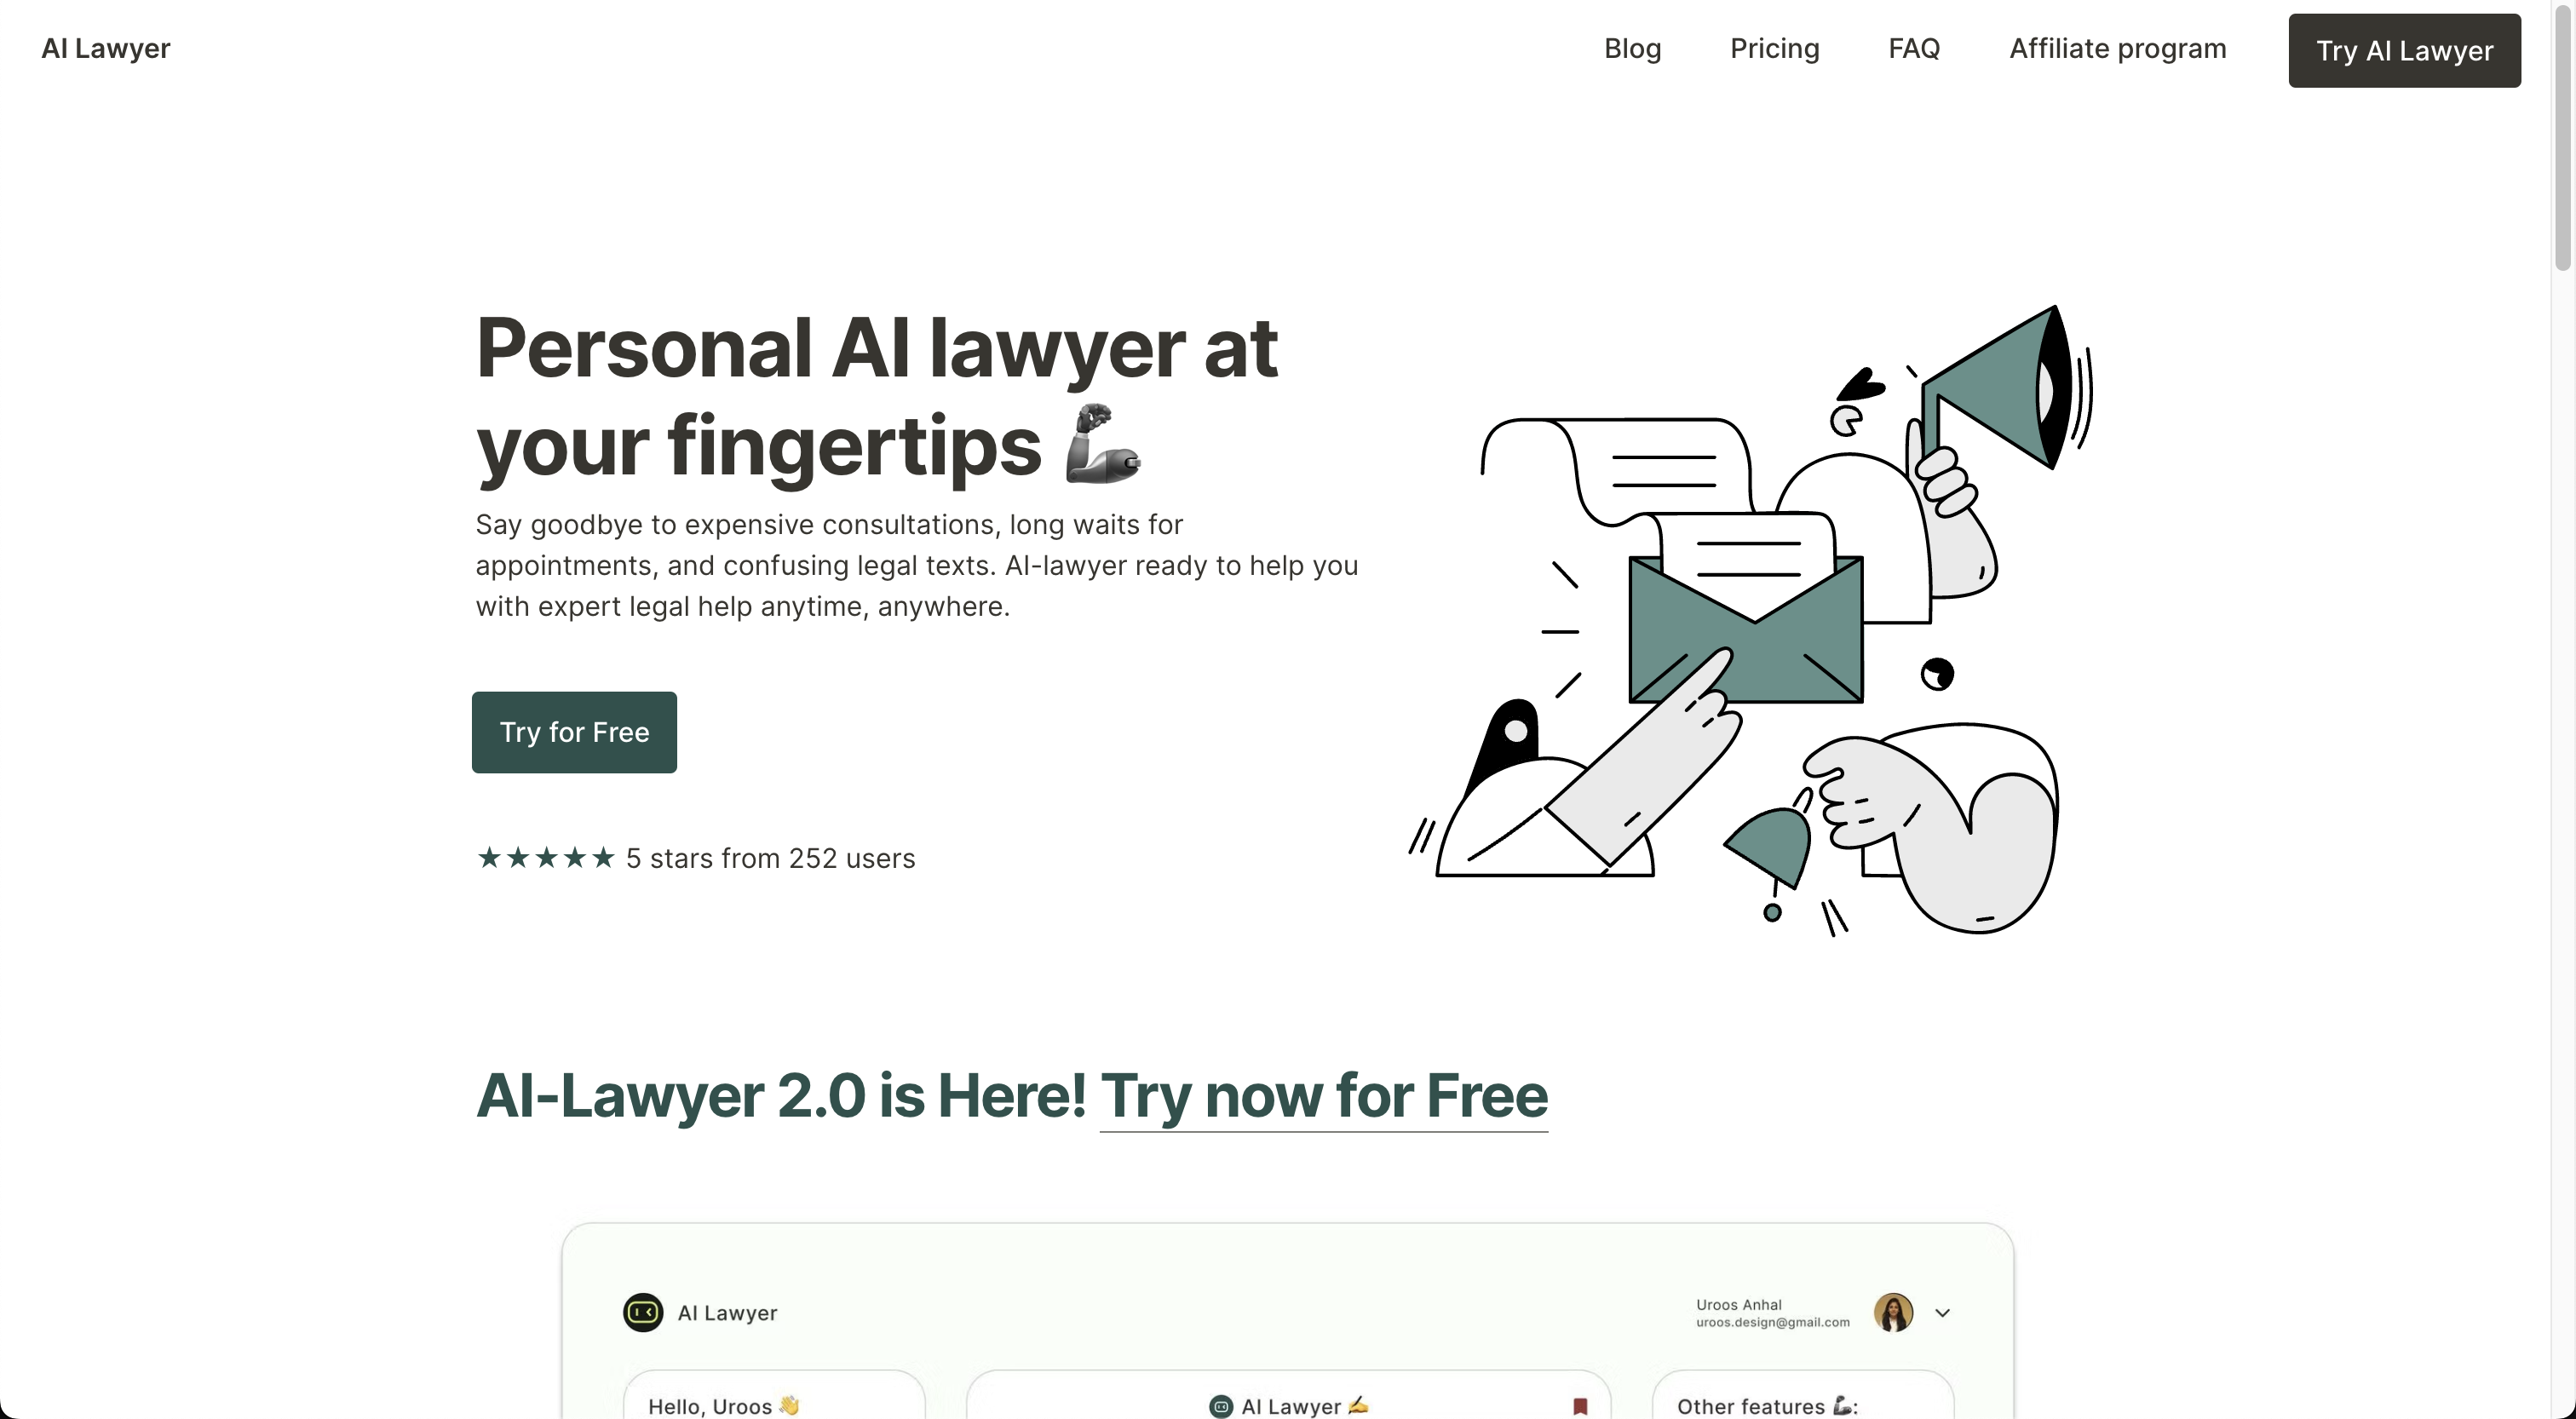 Get Expert Legal Advice Anytime, Anywhere with Ailawyer.pro!